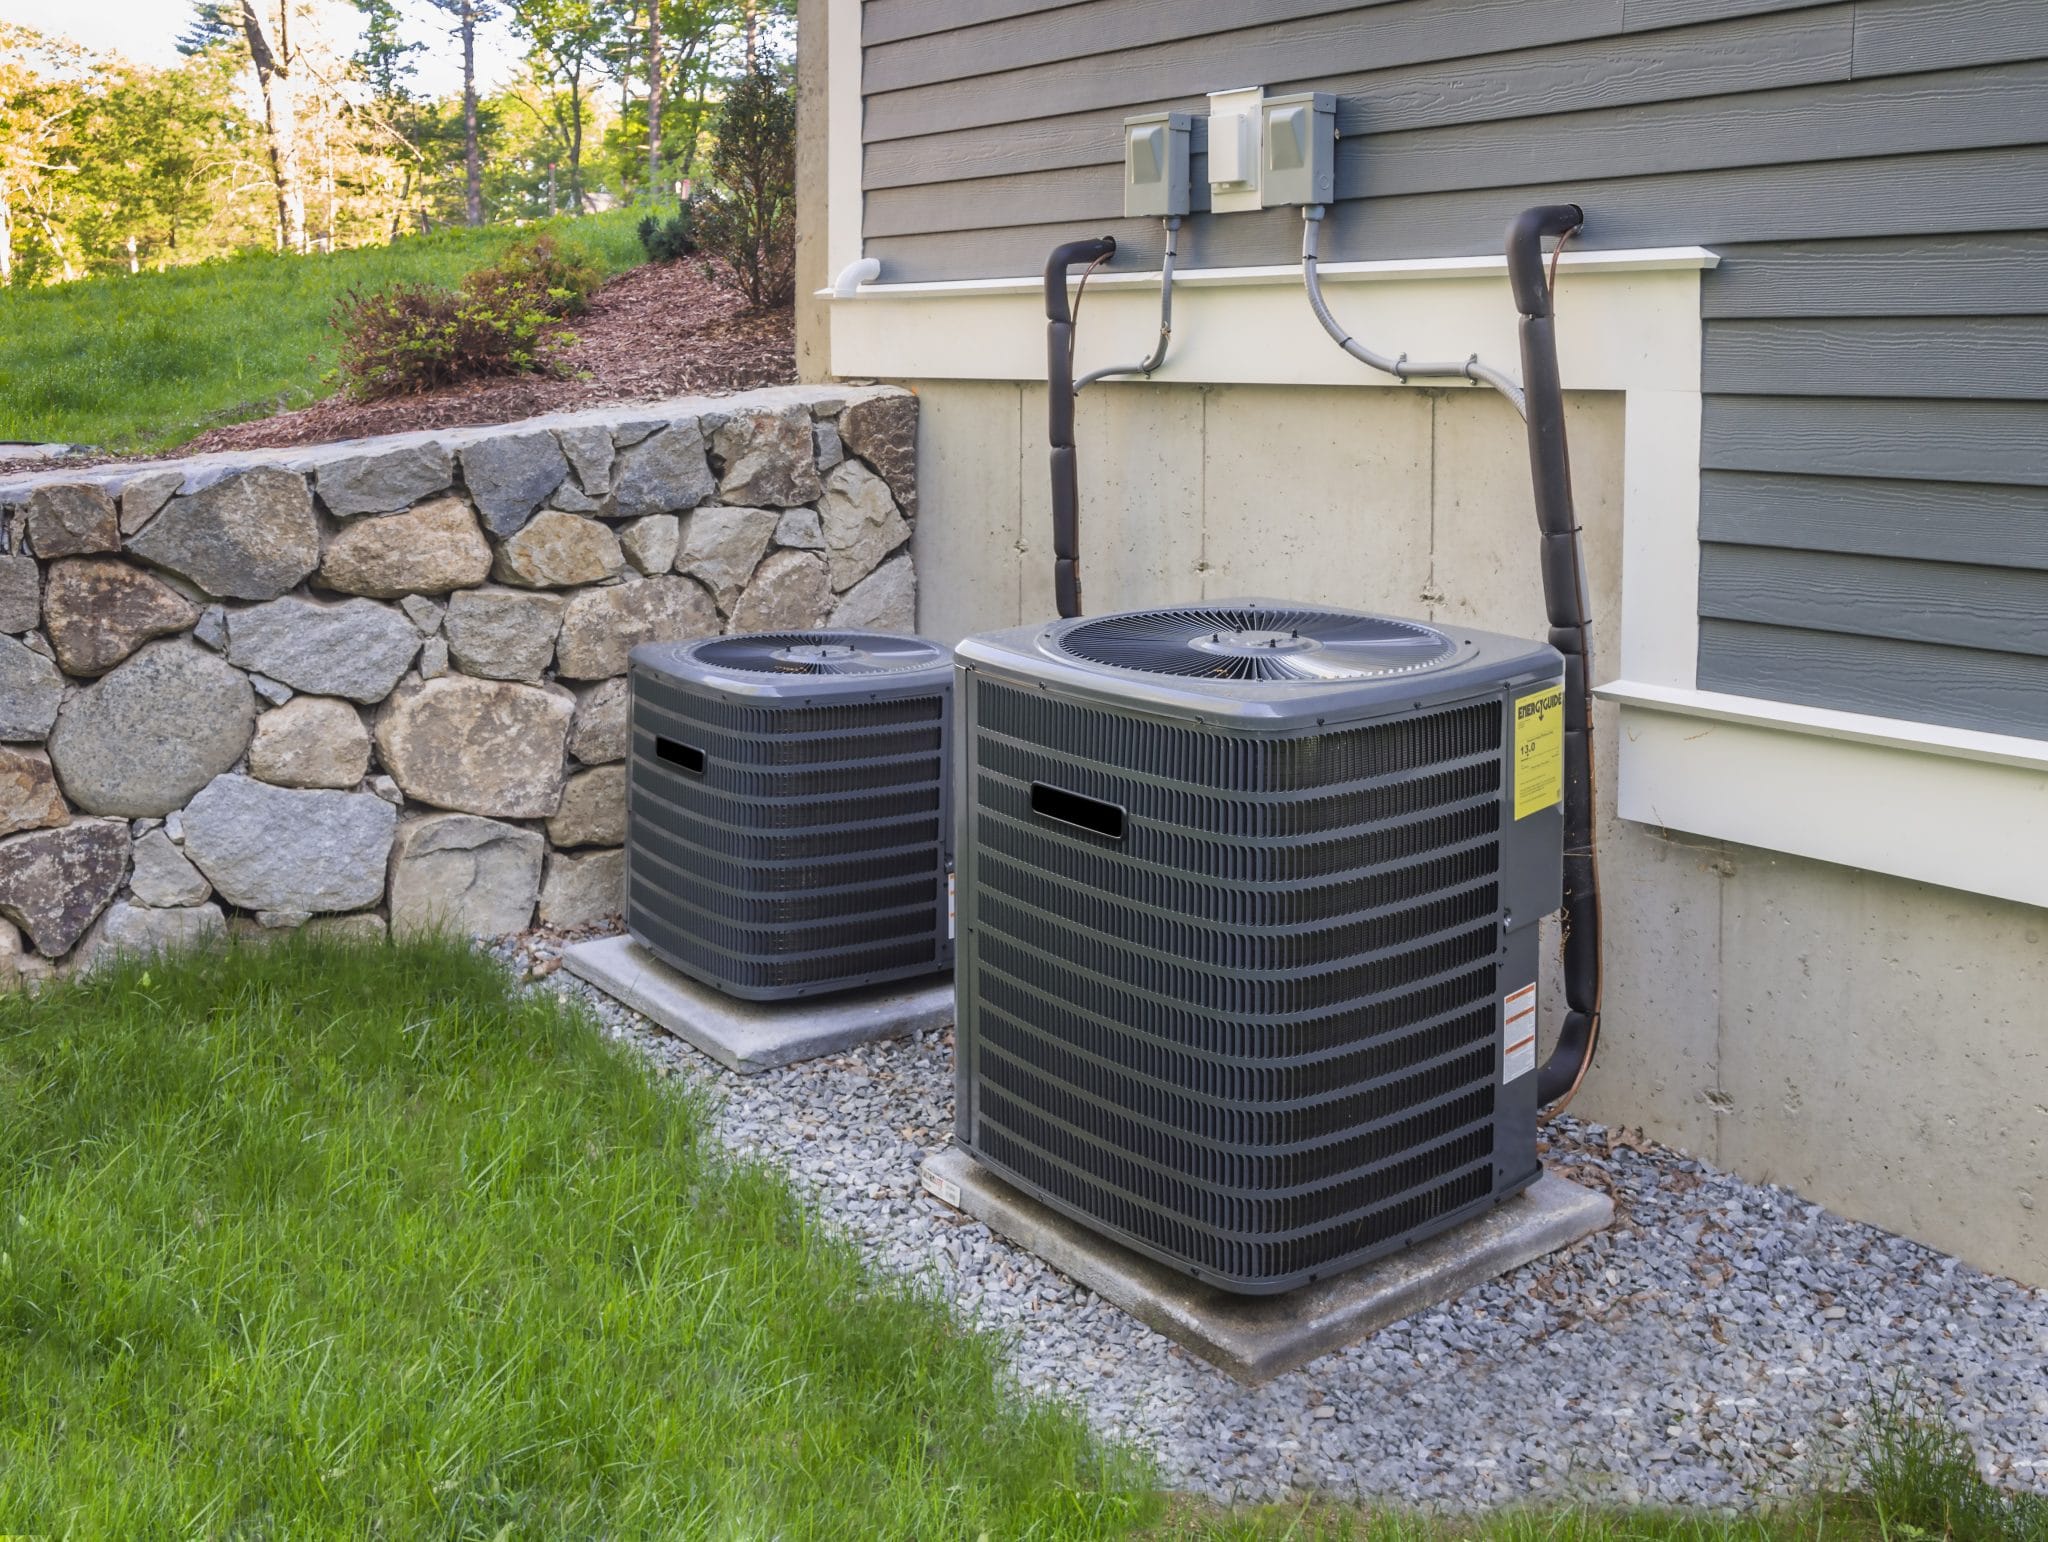 How To Tell When It’s Time To Replace Your HVAC System